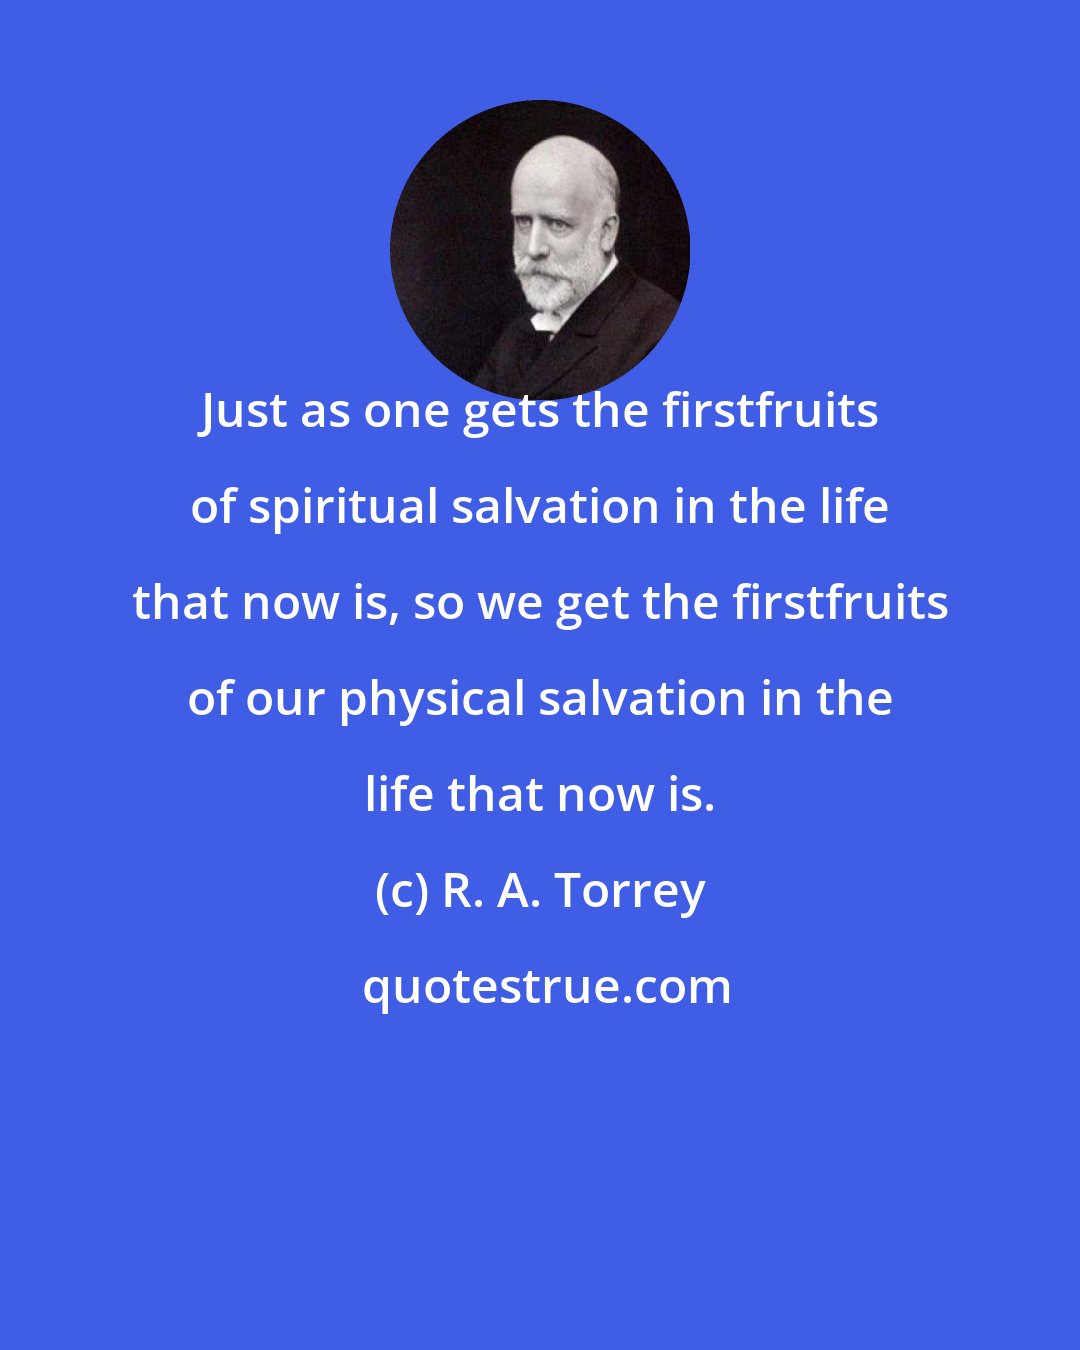 R. A. Torrey: Just as one gets the firstfruits of spiritual salvation in the life that now is, so we get the firstfruits of our physical salvation in the life that now is.